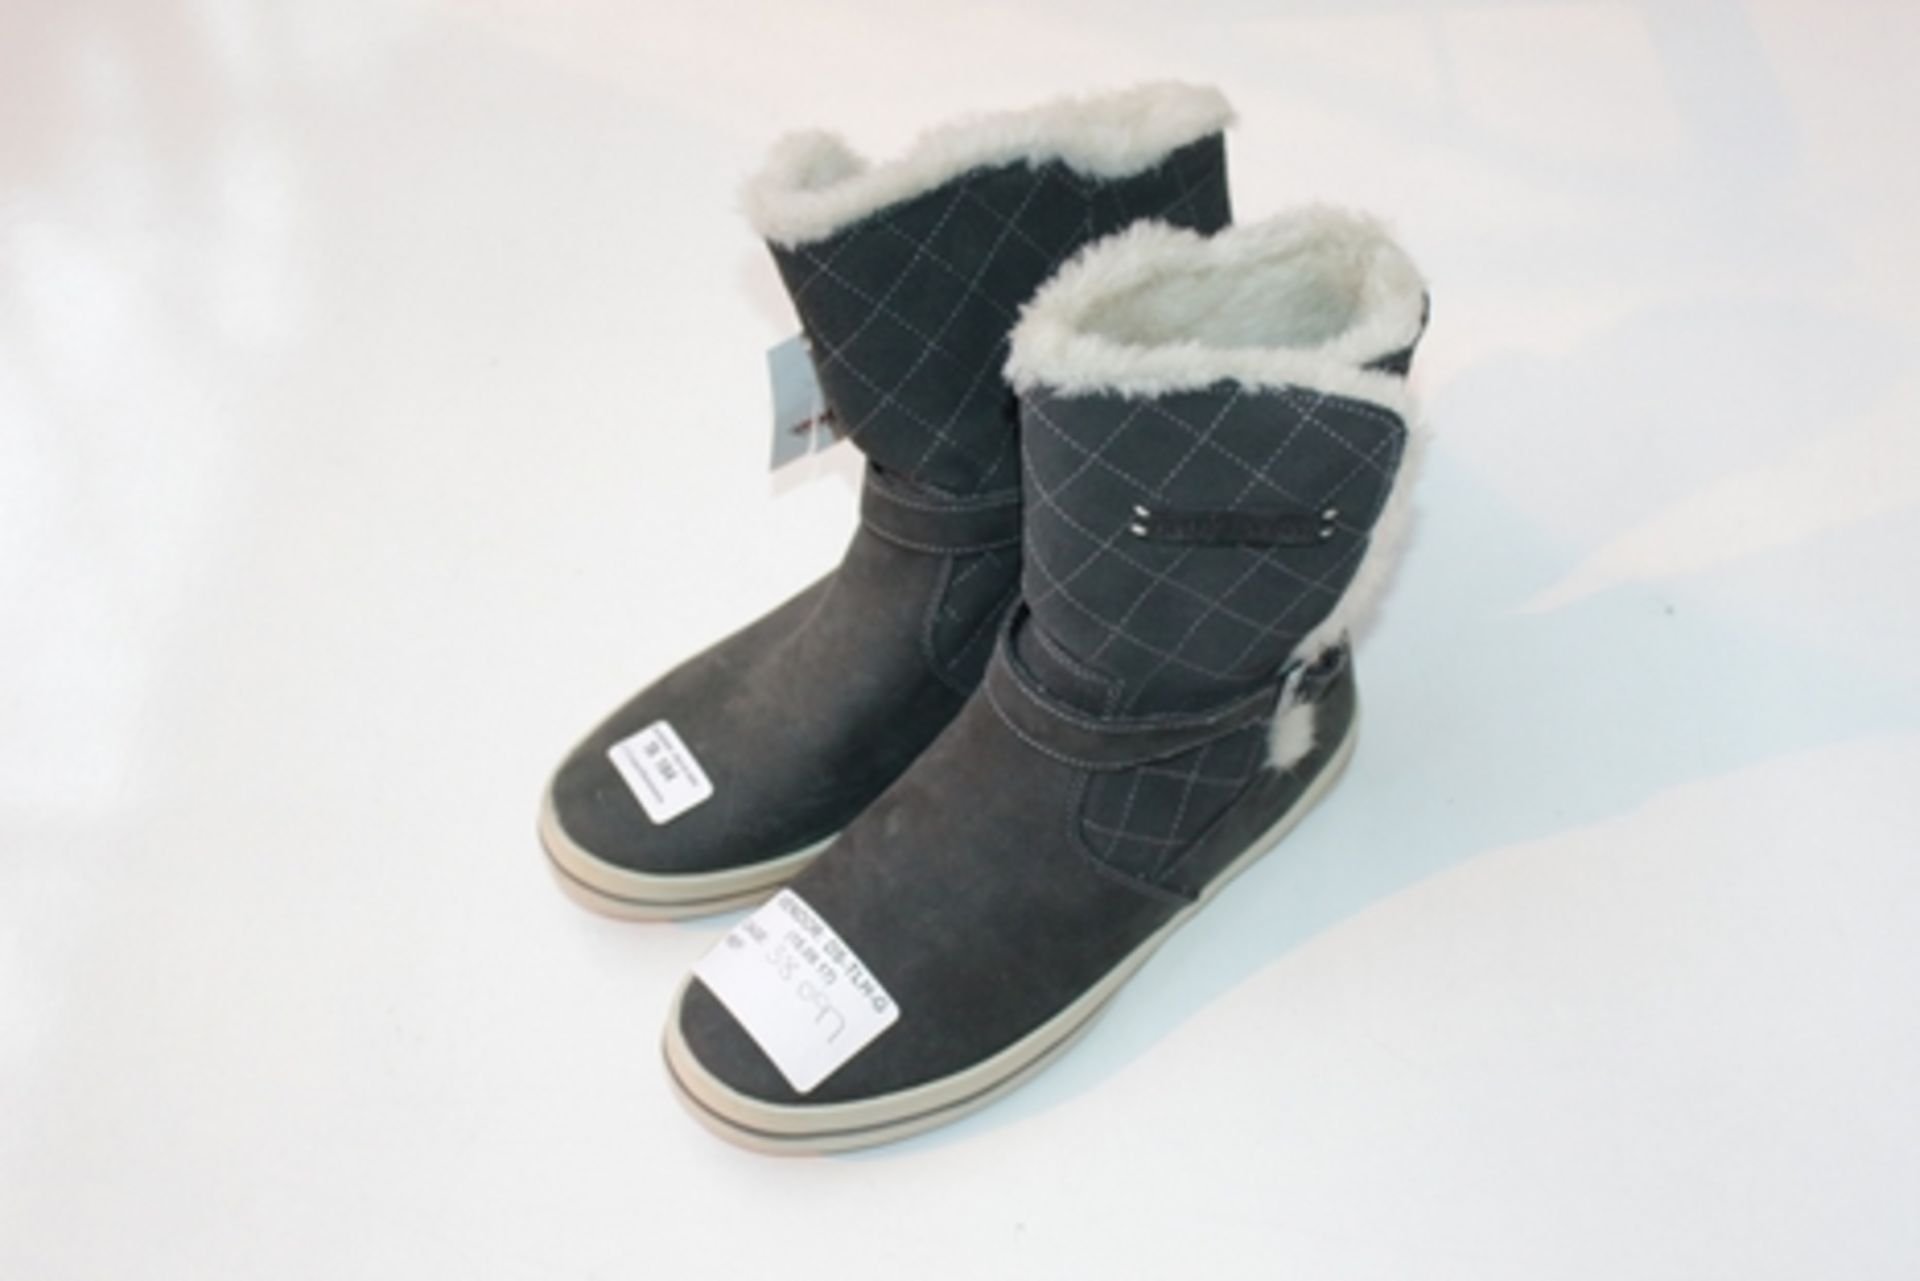 1X UNUSED PAIR OF HELLY HANSON BOOTS SIZE 6 RRP £50 (DS-TLH-G) (38.097)